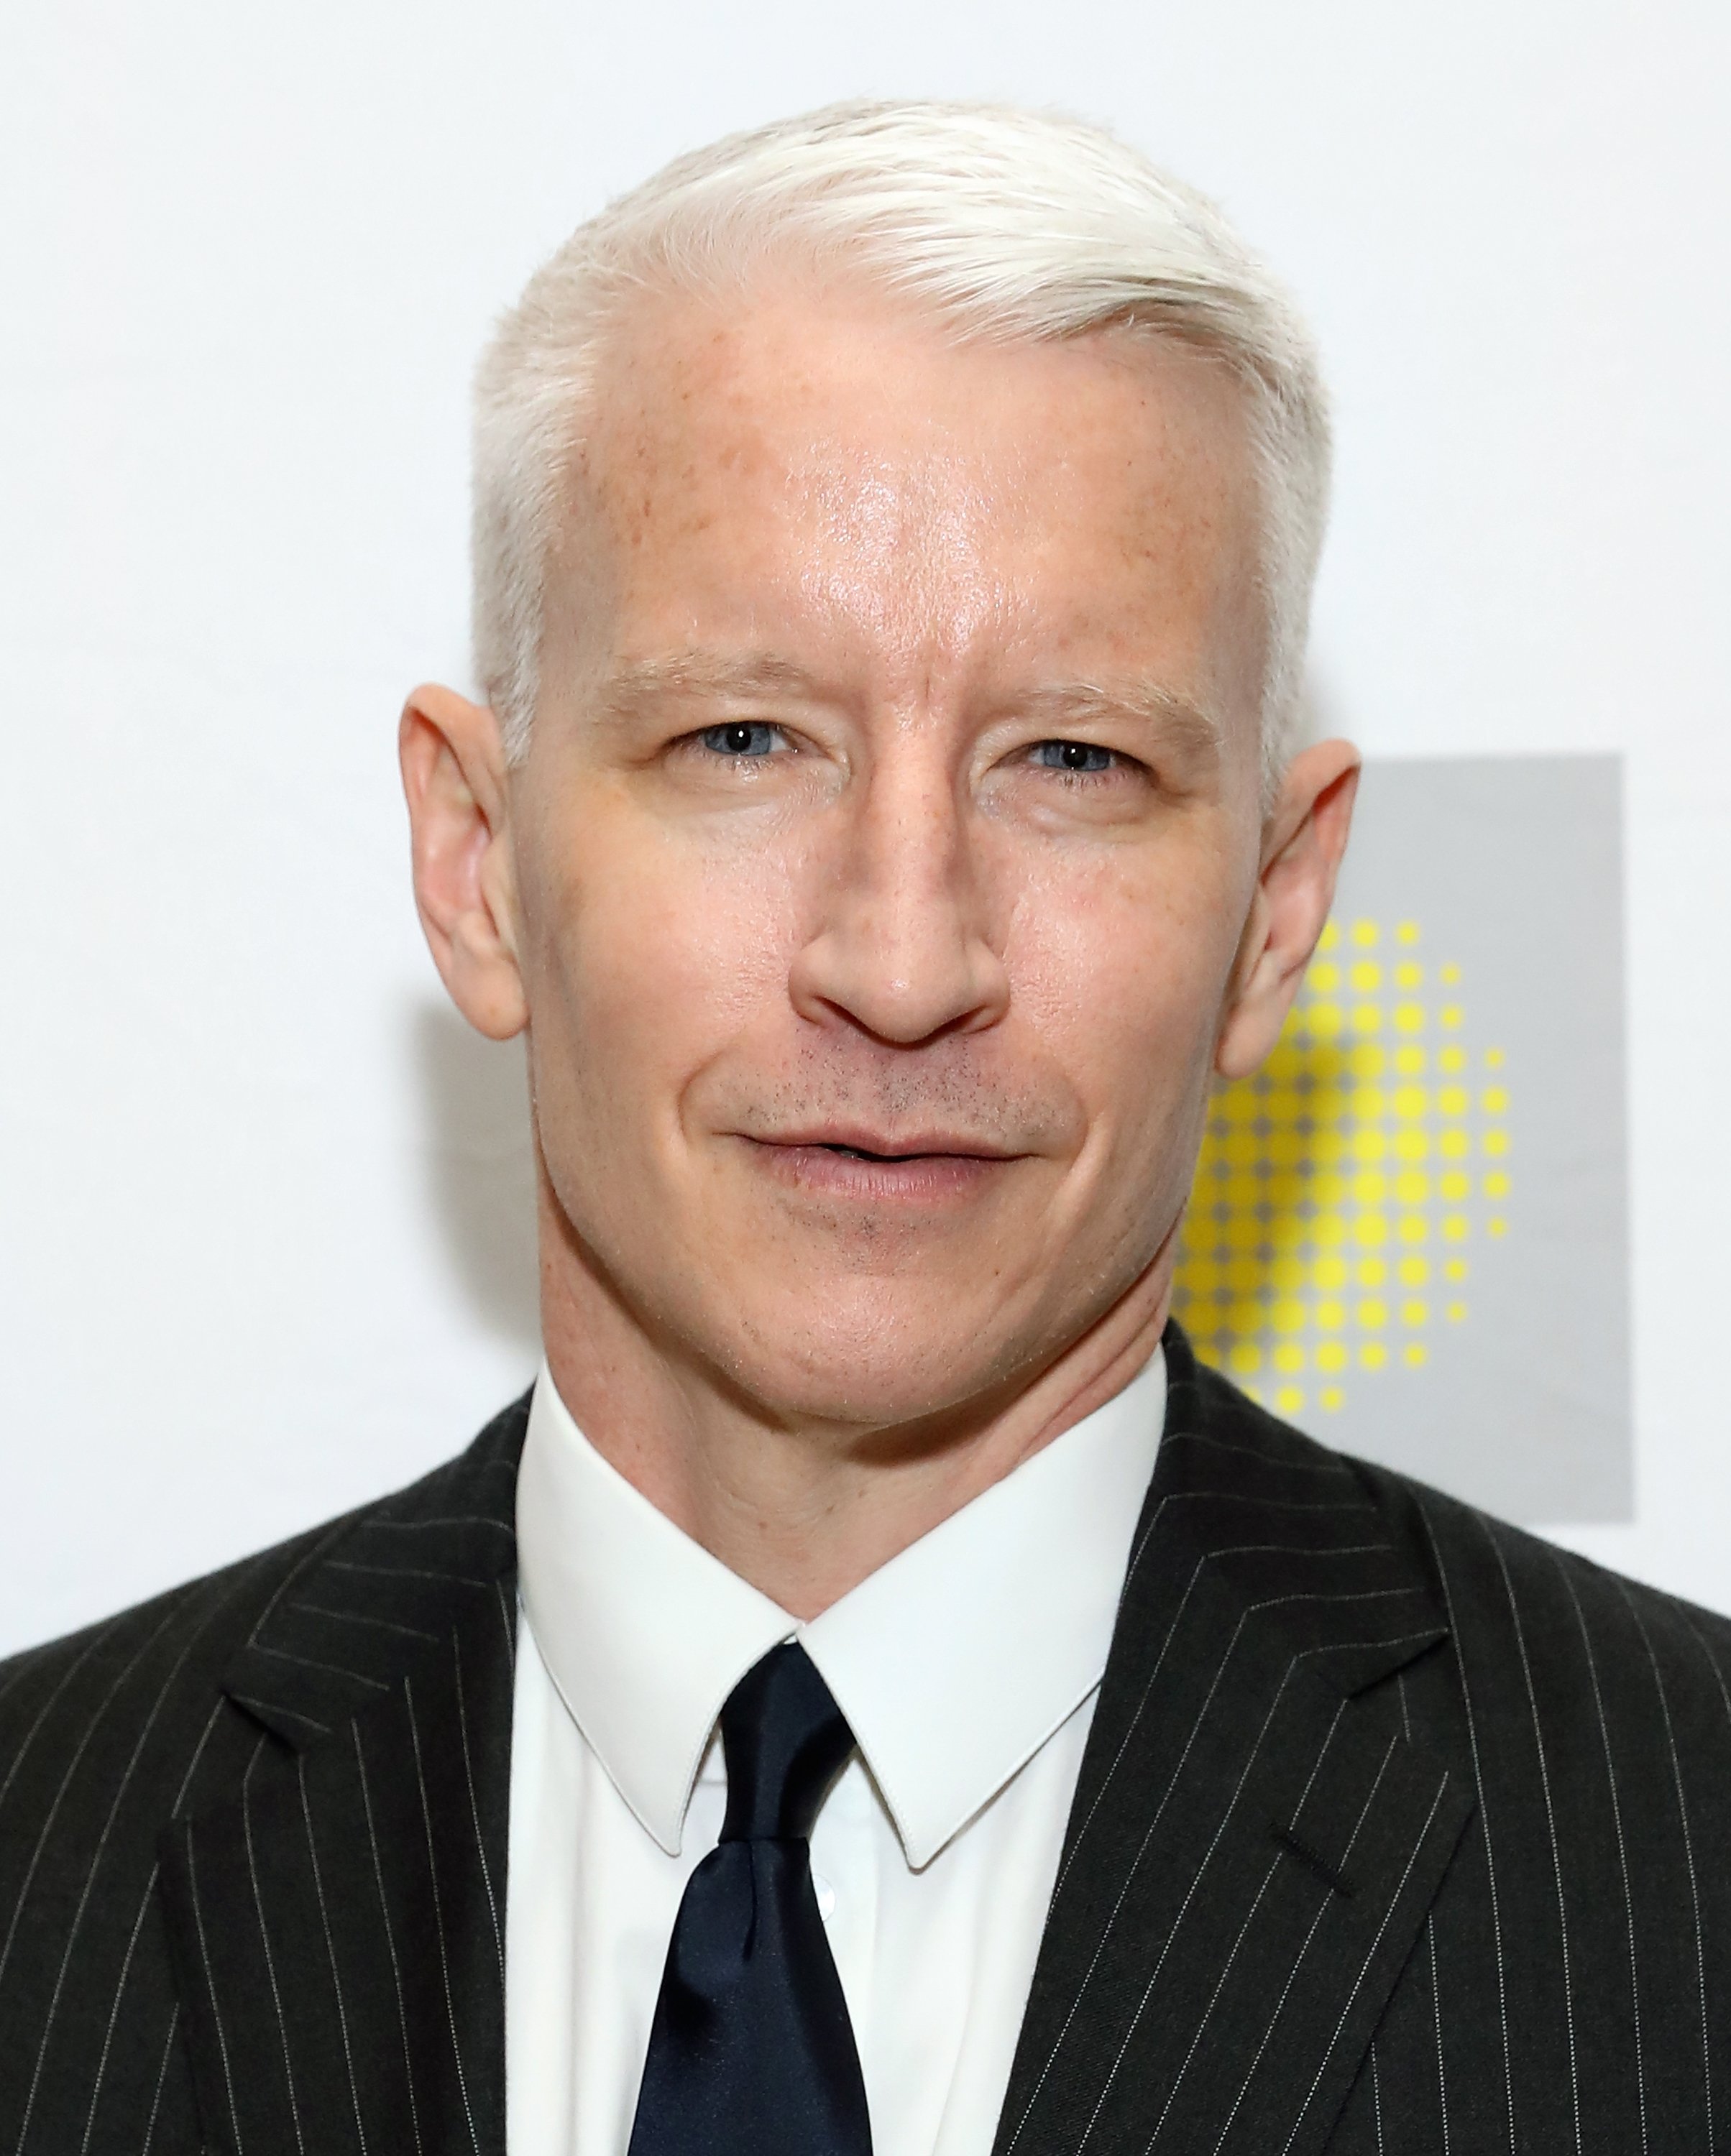 Anderson Cooper attends the 10th Annual Hope For Depression Research Foundation's HOPE Luncheon on November 15, 2016, in New York City. | Source: Getty Images.